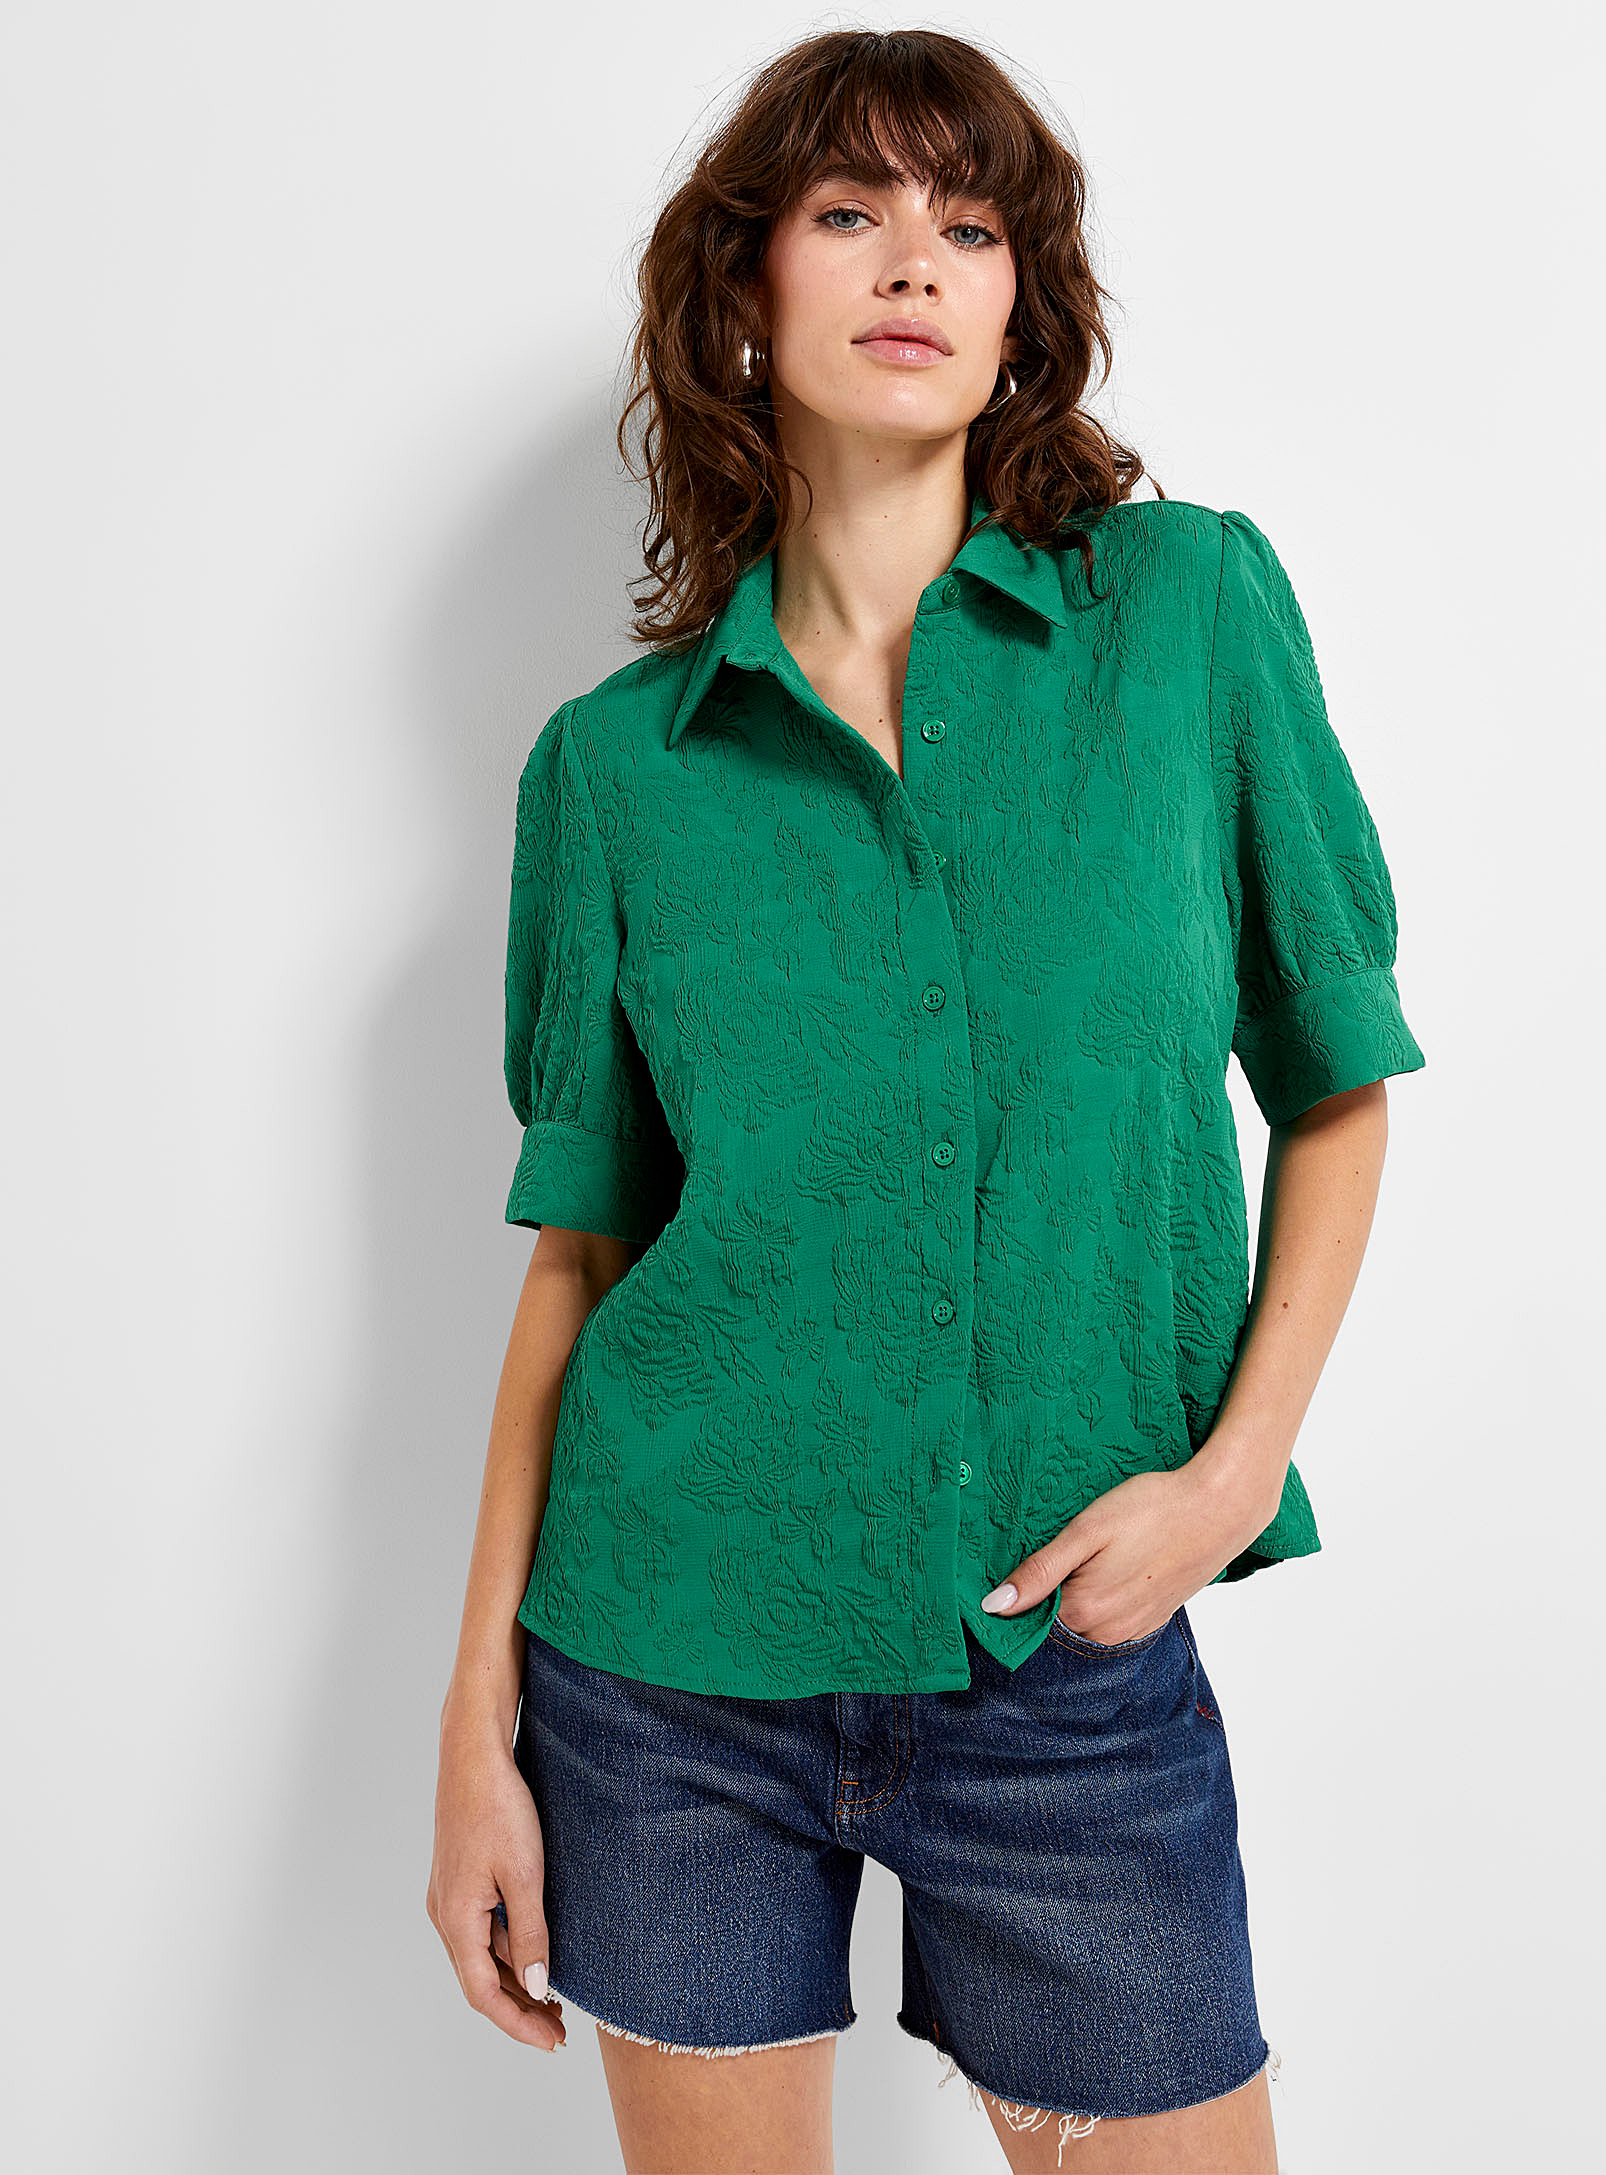 Contemporaine Embossed Floral Shirt In Emerald/kelly Green